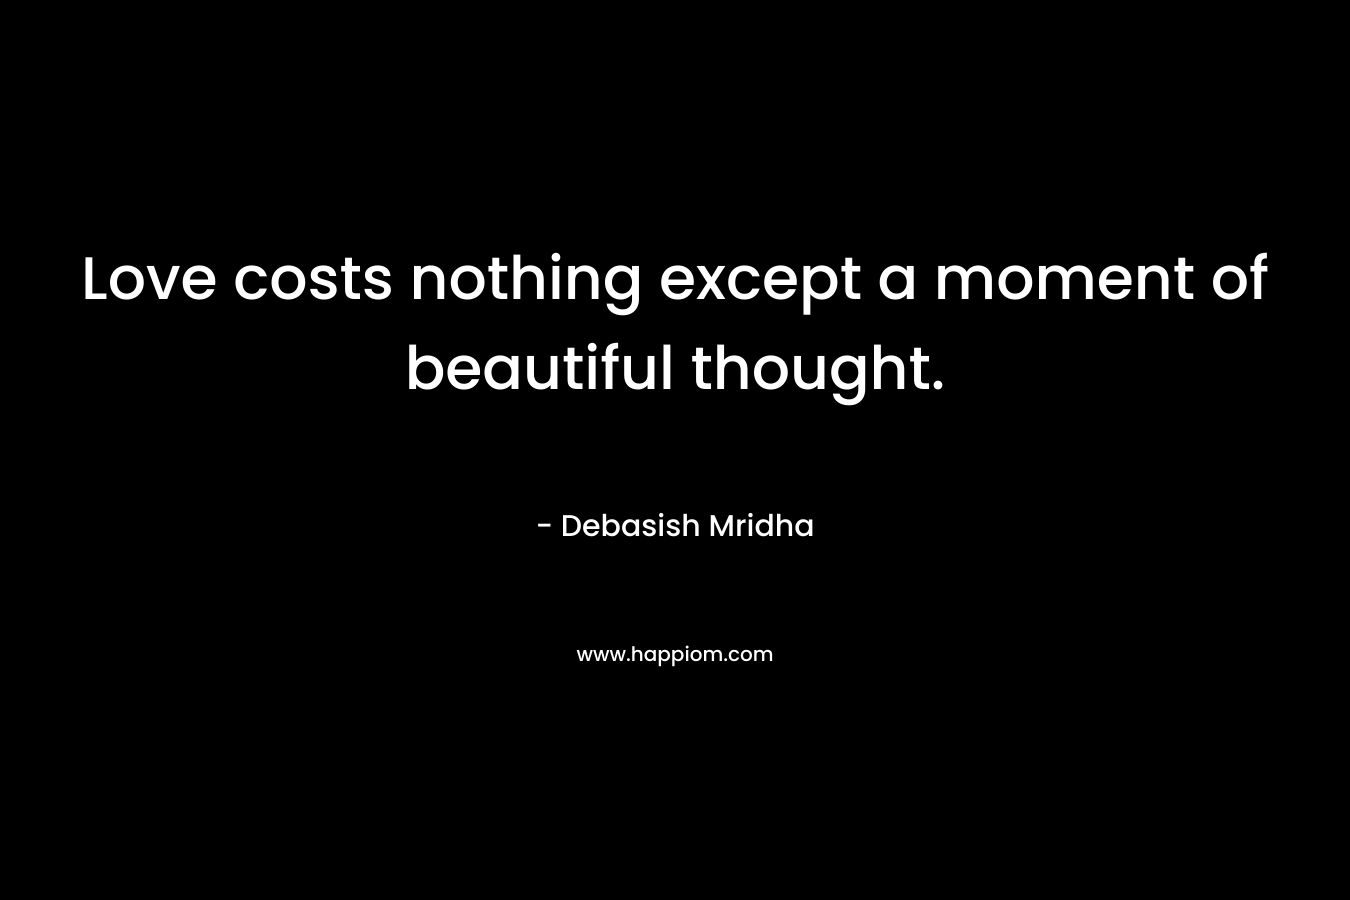 Love costs nothing except a moment of beautiful thought.